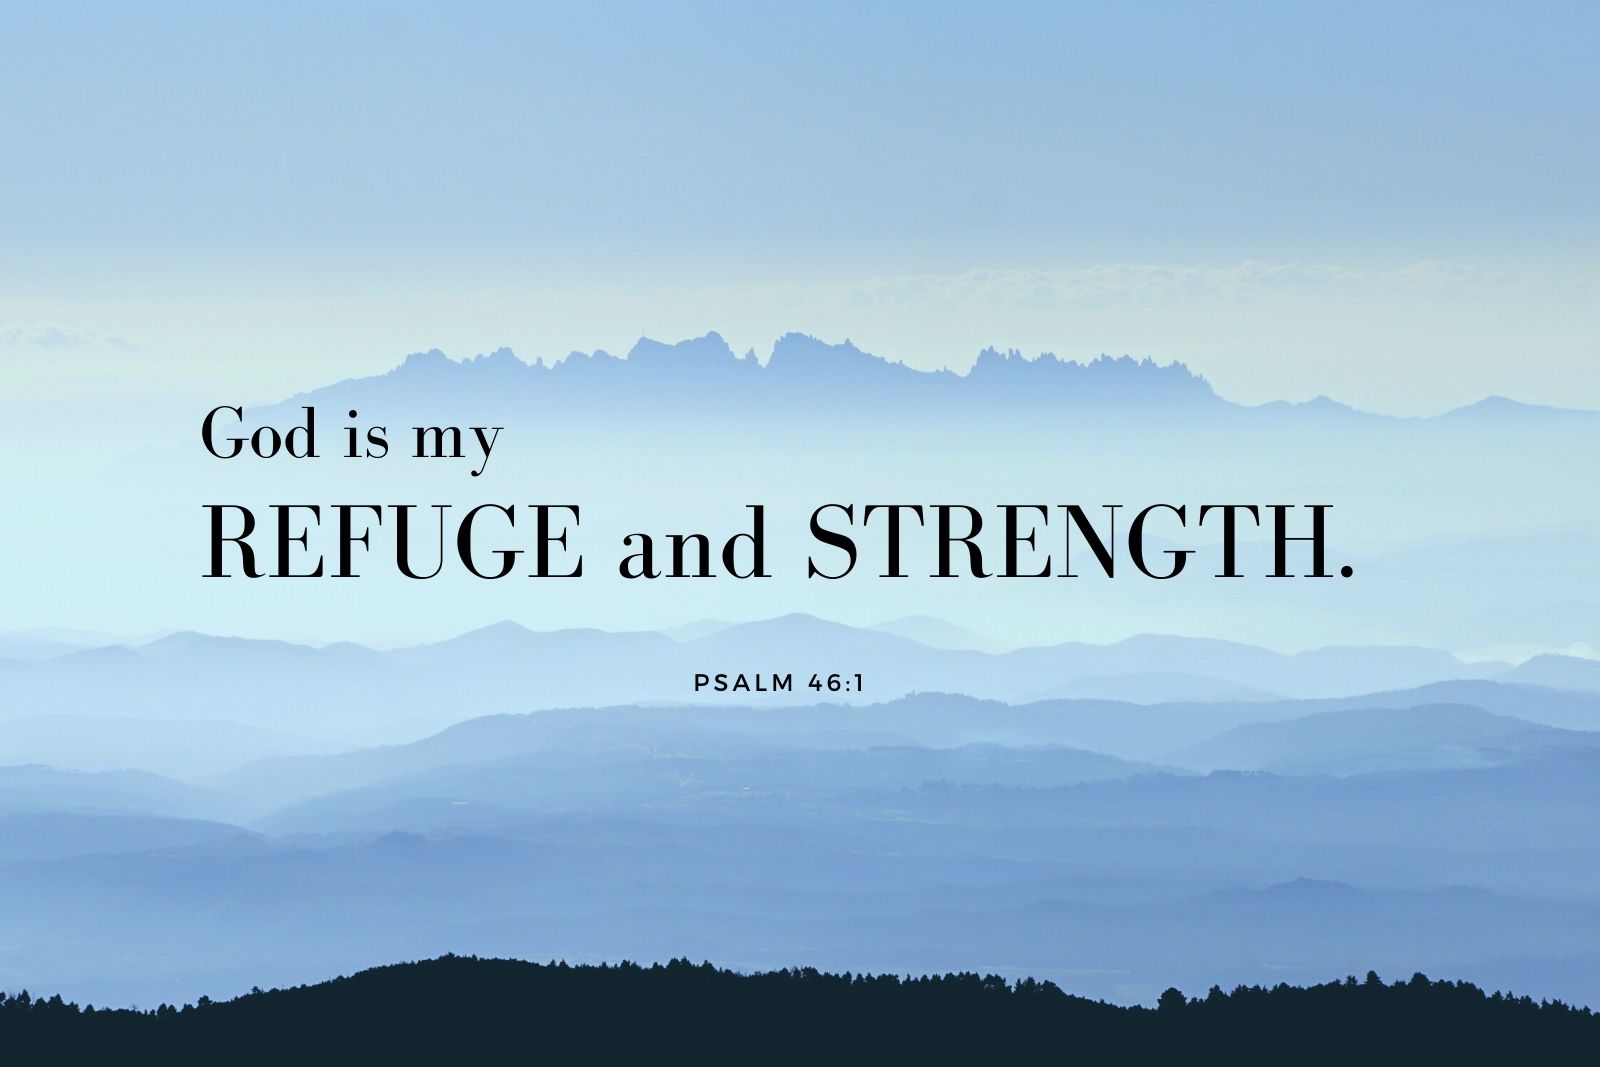 God is my refuge and strength. Psalm 46:1